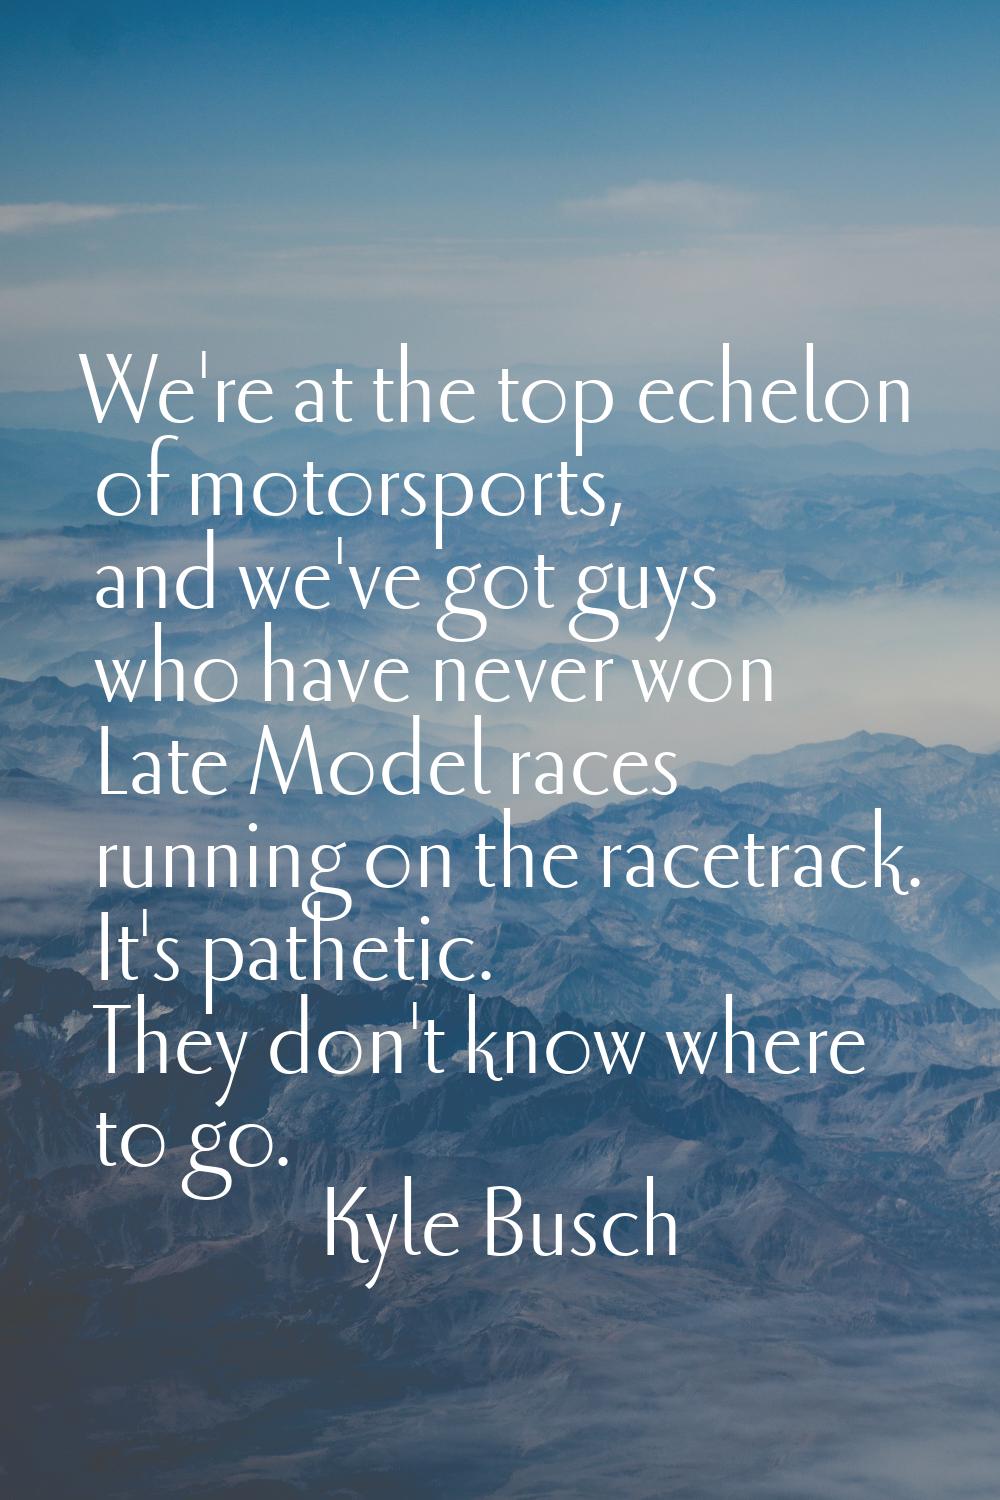 We're at the top echelon of motorsports, and we've got guys who have never won Late Model races run